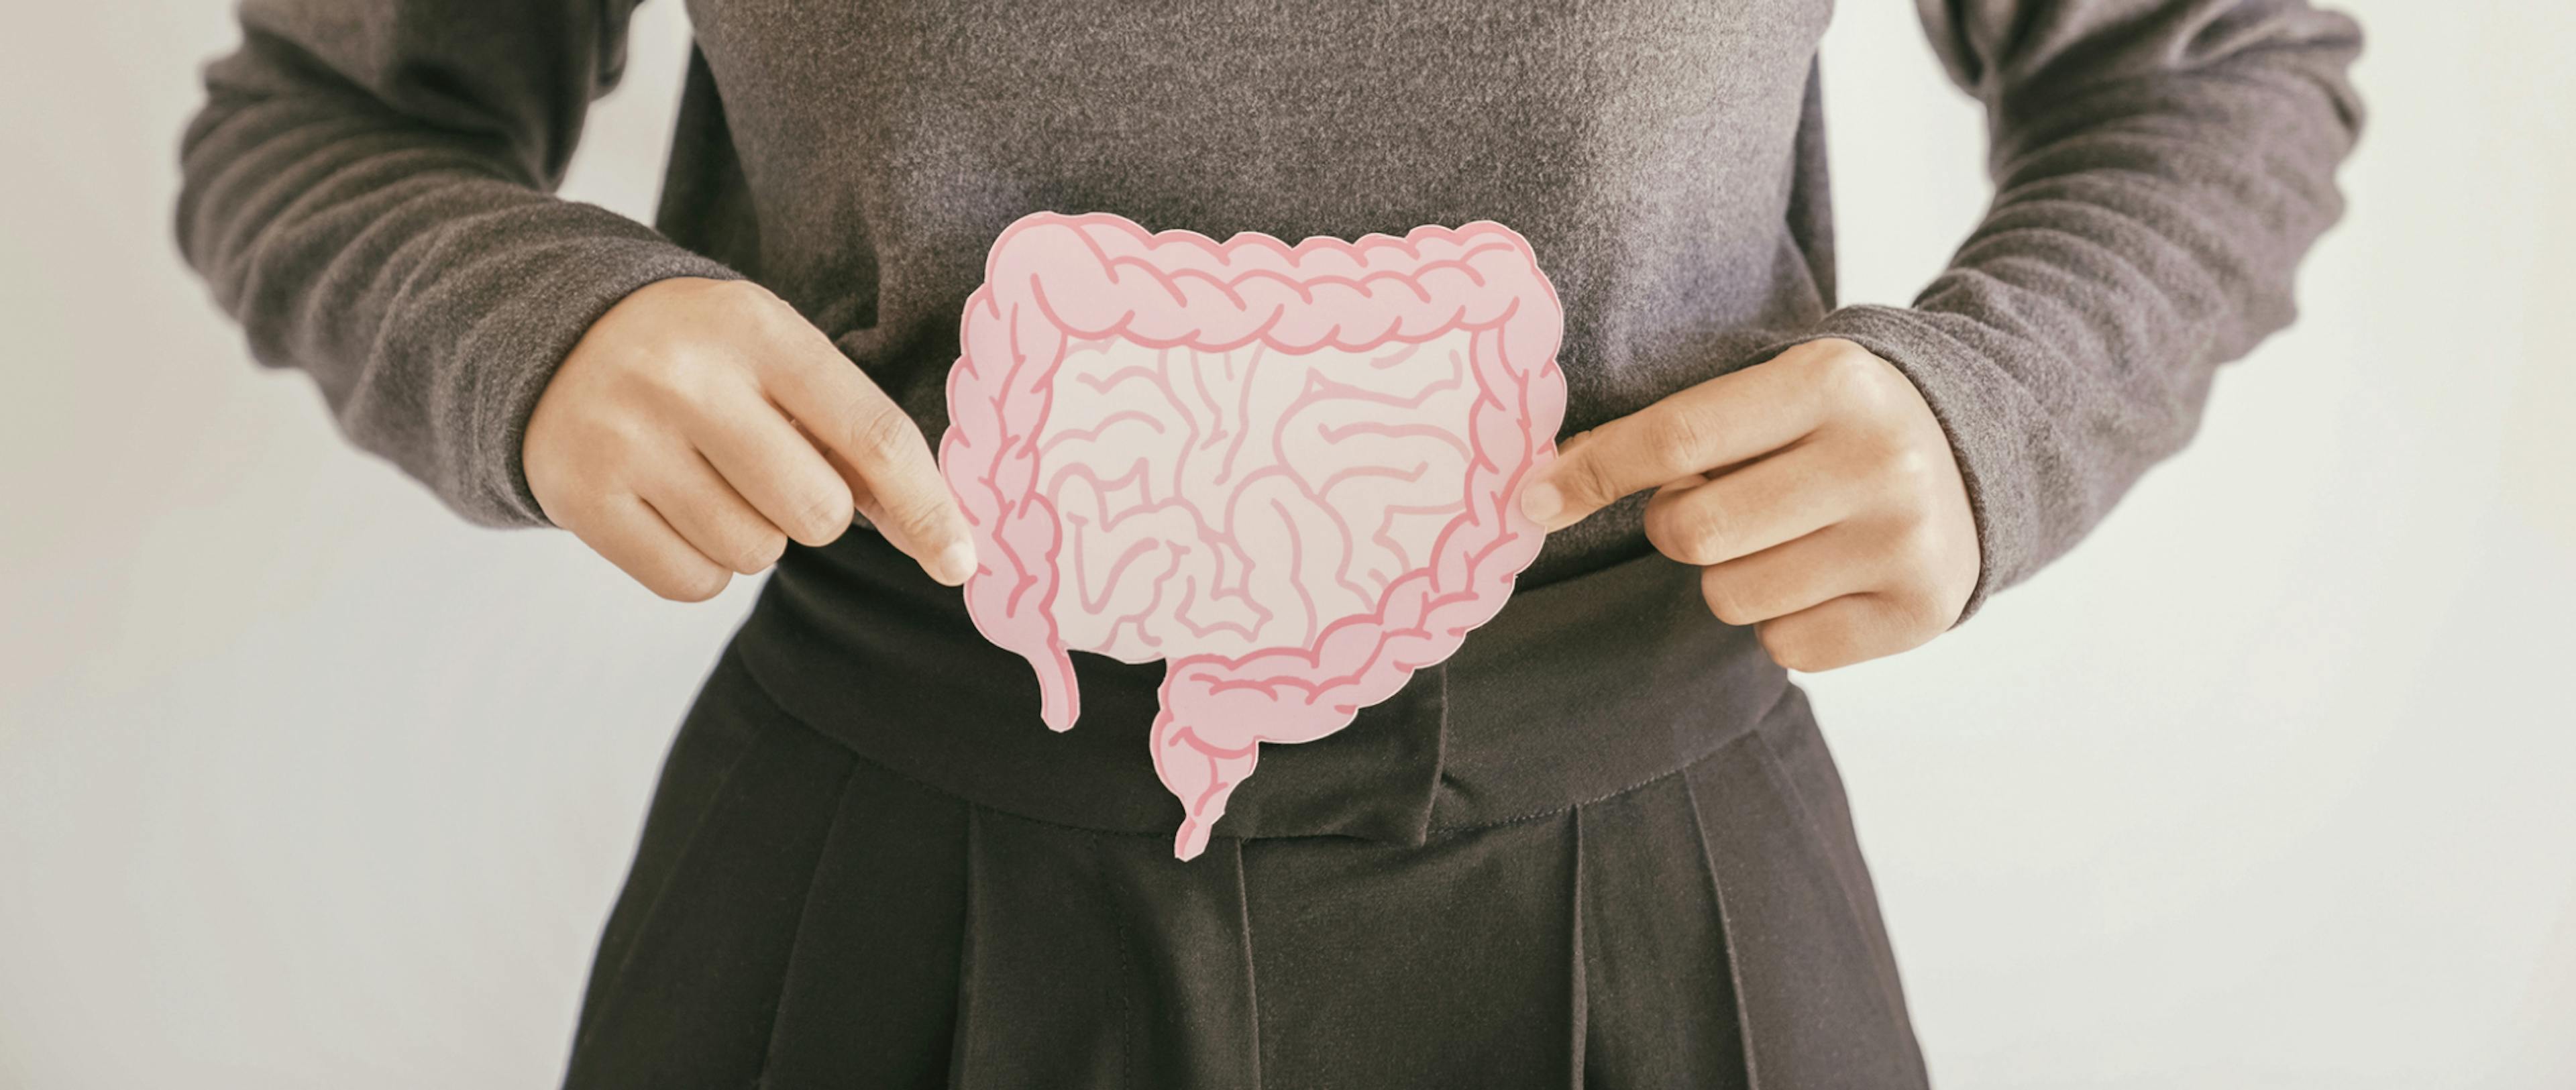 A person holds an image of the intestine to describe better gut health